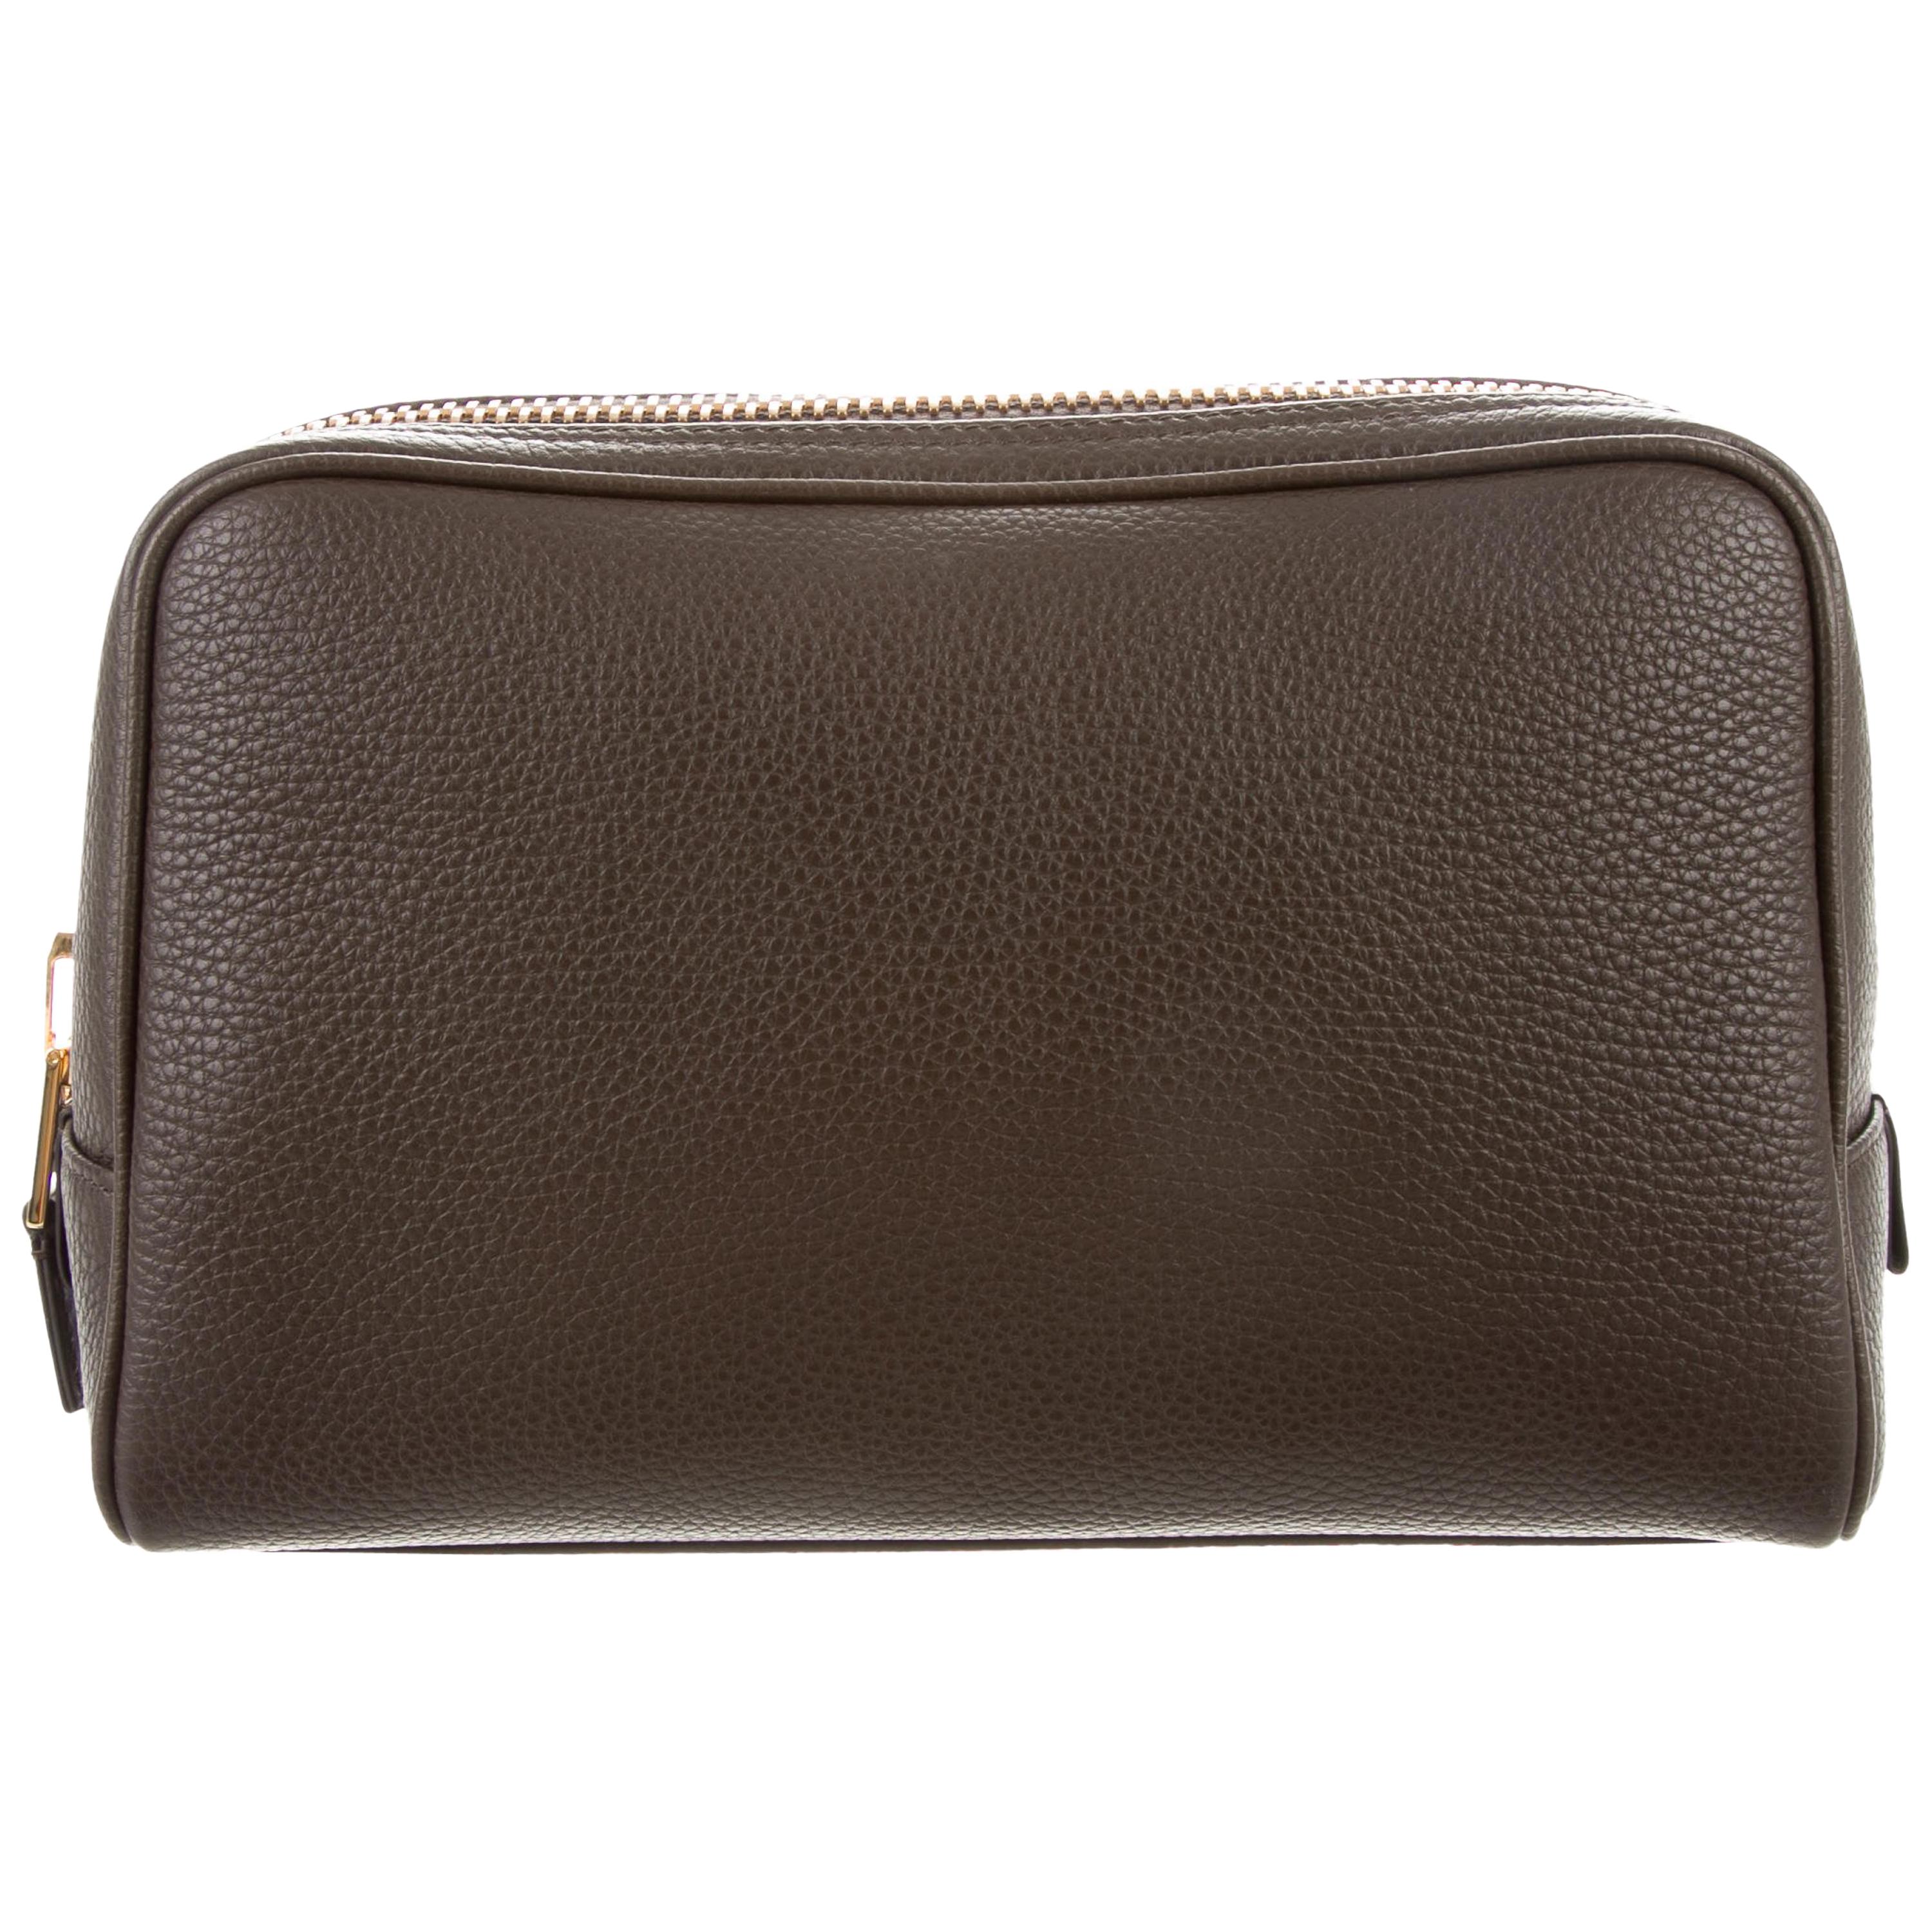 Tom Ford NEW Men's Women's Vanity Cosmetic Taupe Leather Toiletry Travel Bag